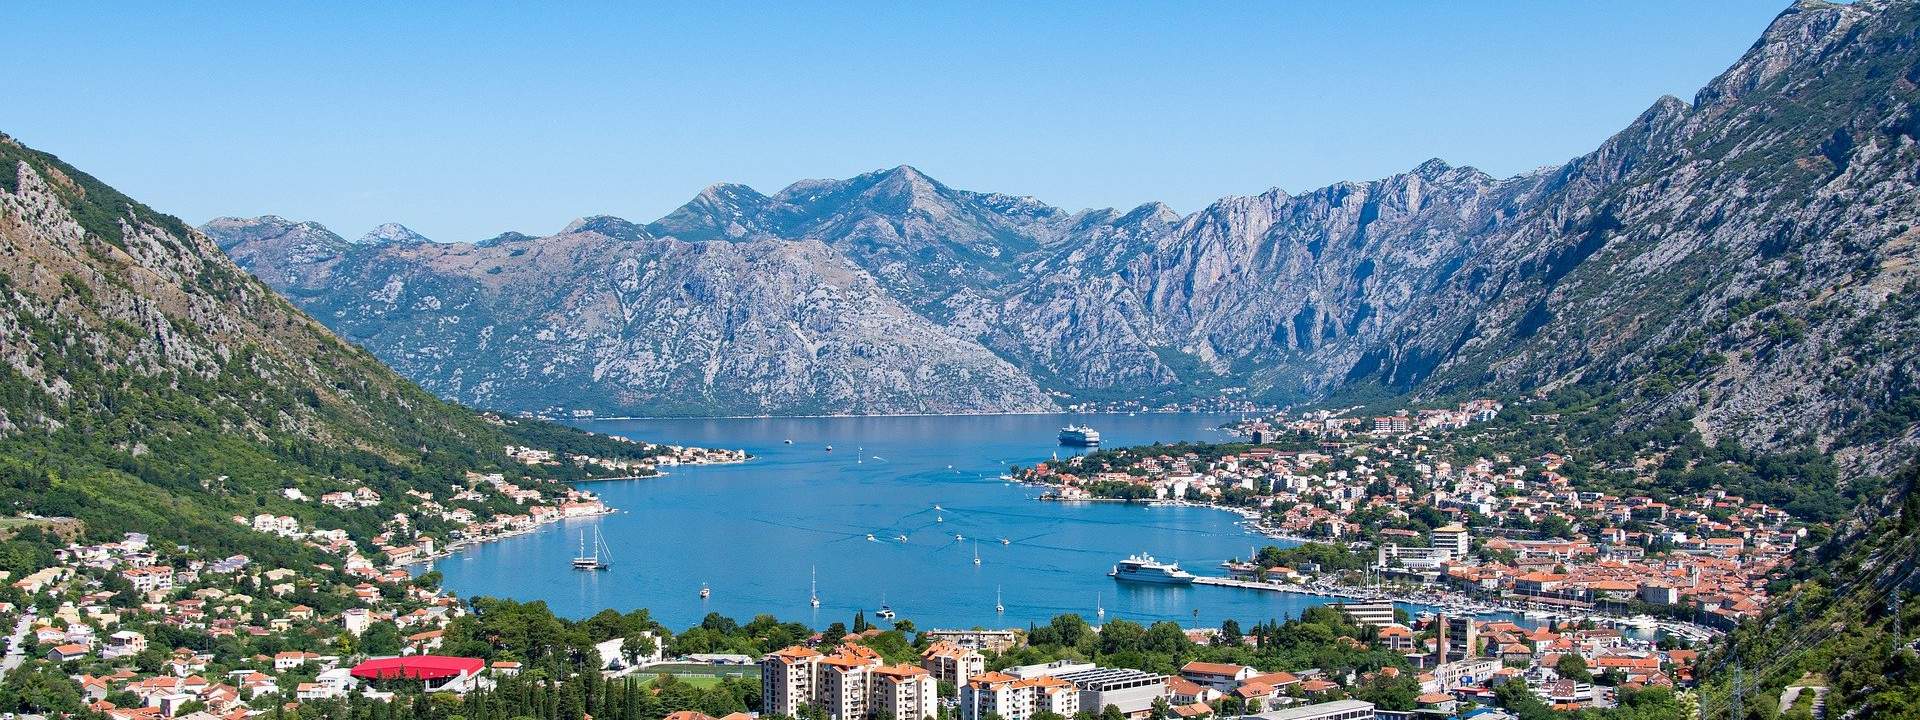 Montenegro, from the bay of kotor to the adriatic coast by schooner